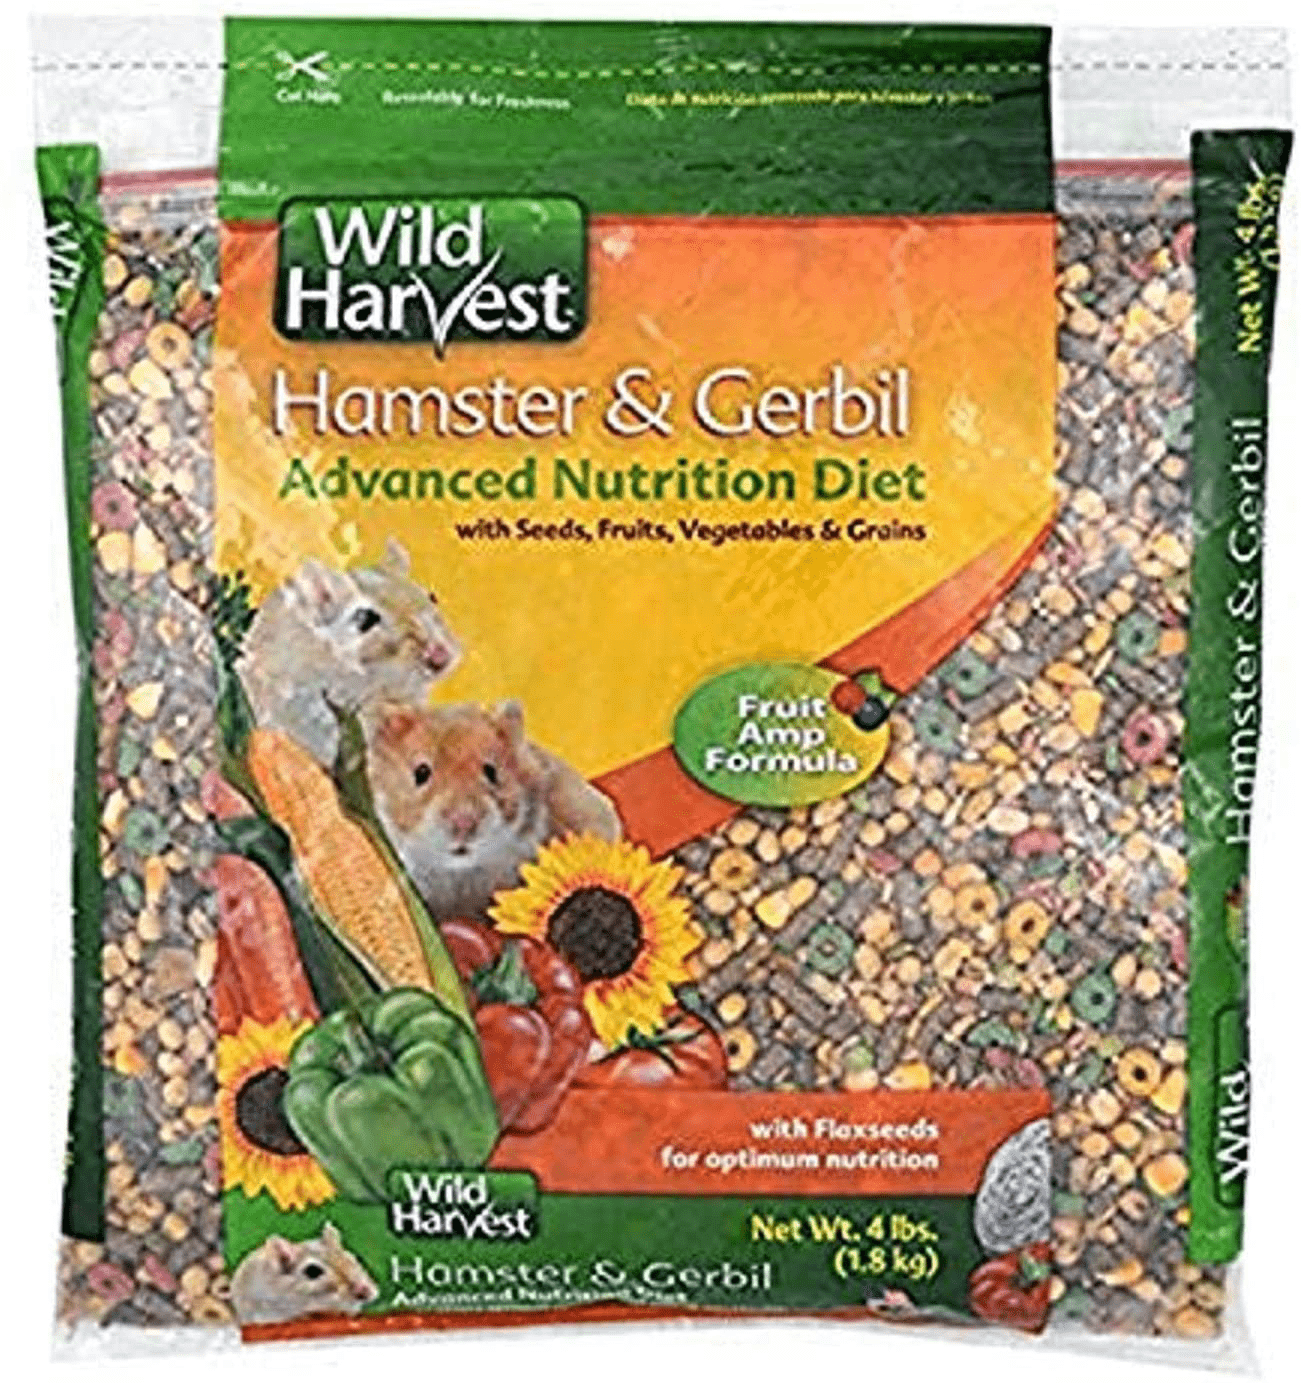 Wild Harvest Nutrition Diet and Advanced Nutrition Diet for Hamsters and Gerbils